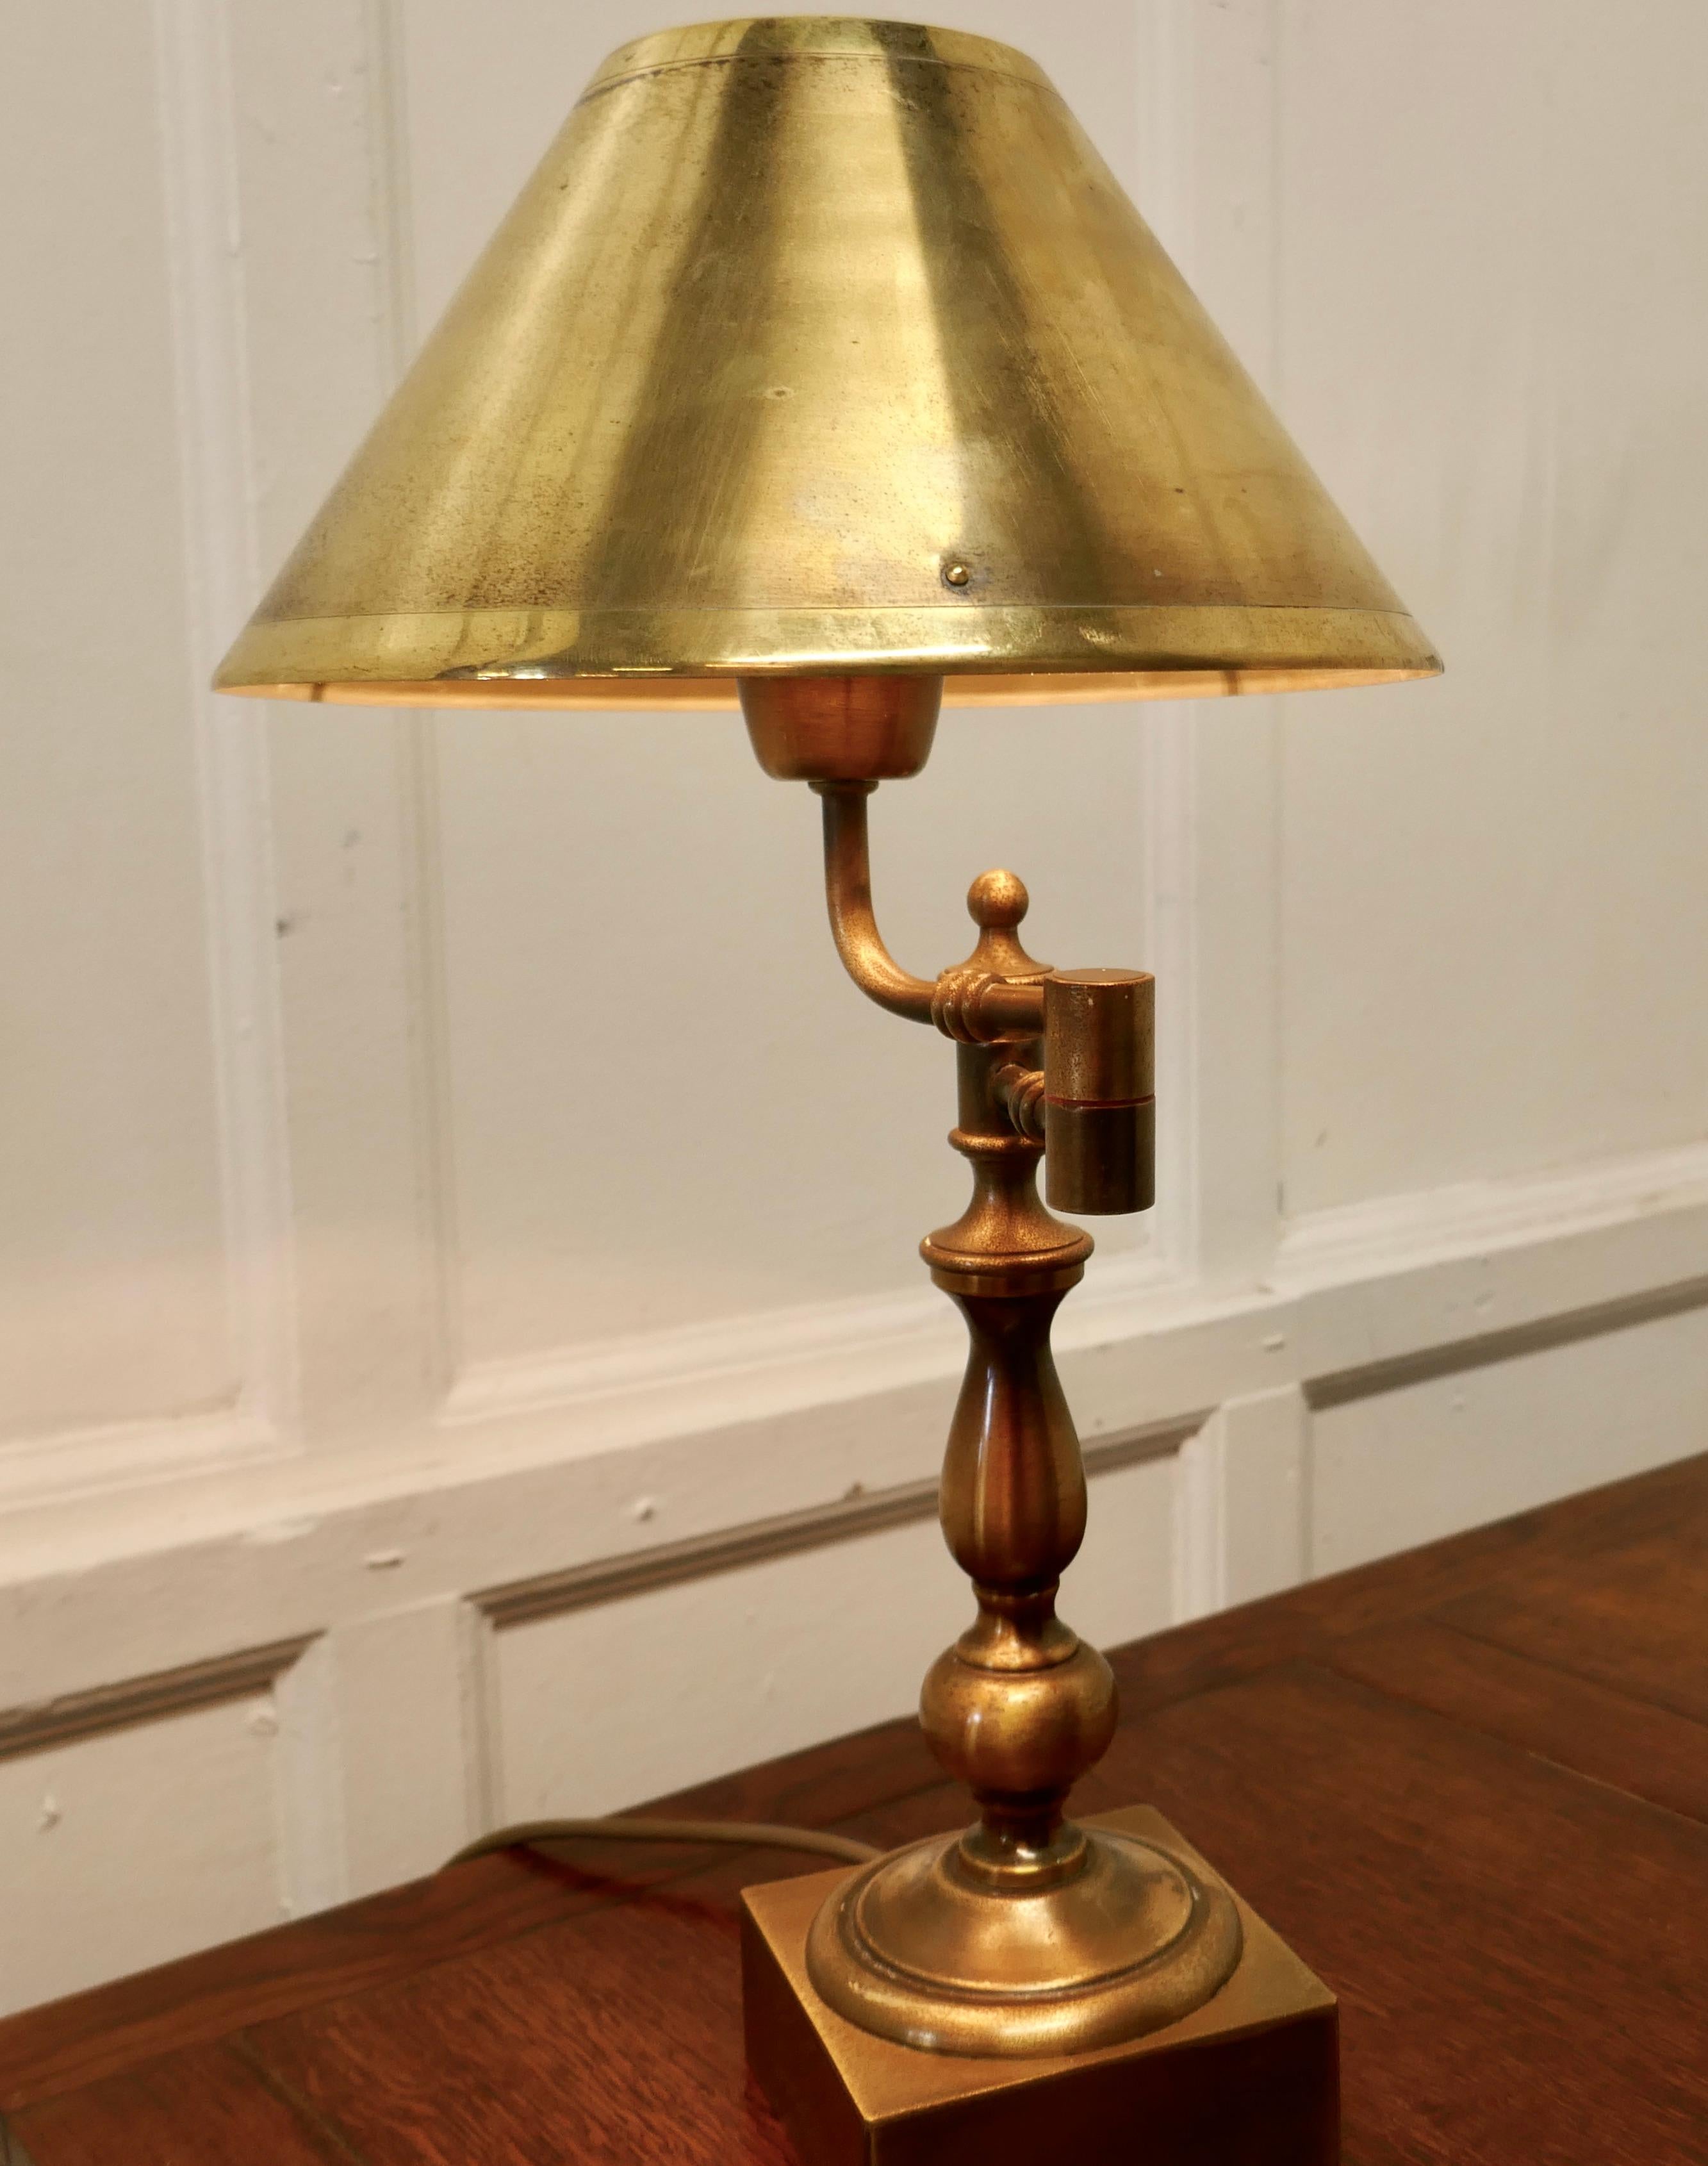 French adjustable brass desk lamp 

This is an unusual piece, the lamp has a heavy brass base which supports an articulated arm, this can be moved to adjust the position of the light
The lamp works well and has a brass cone shaped shade
A very